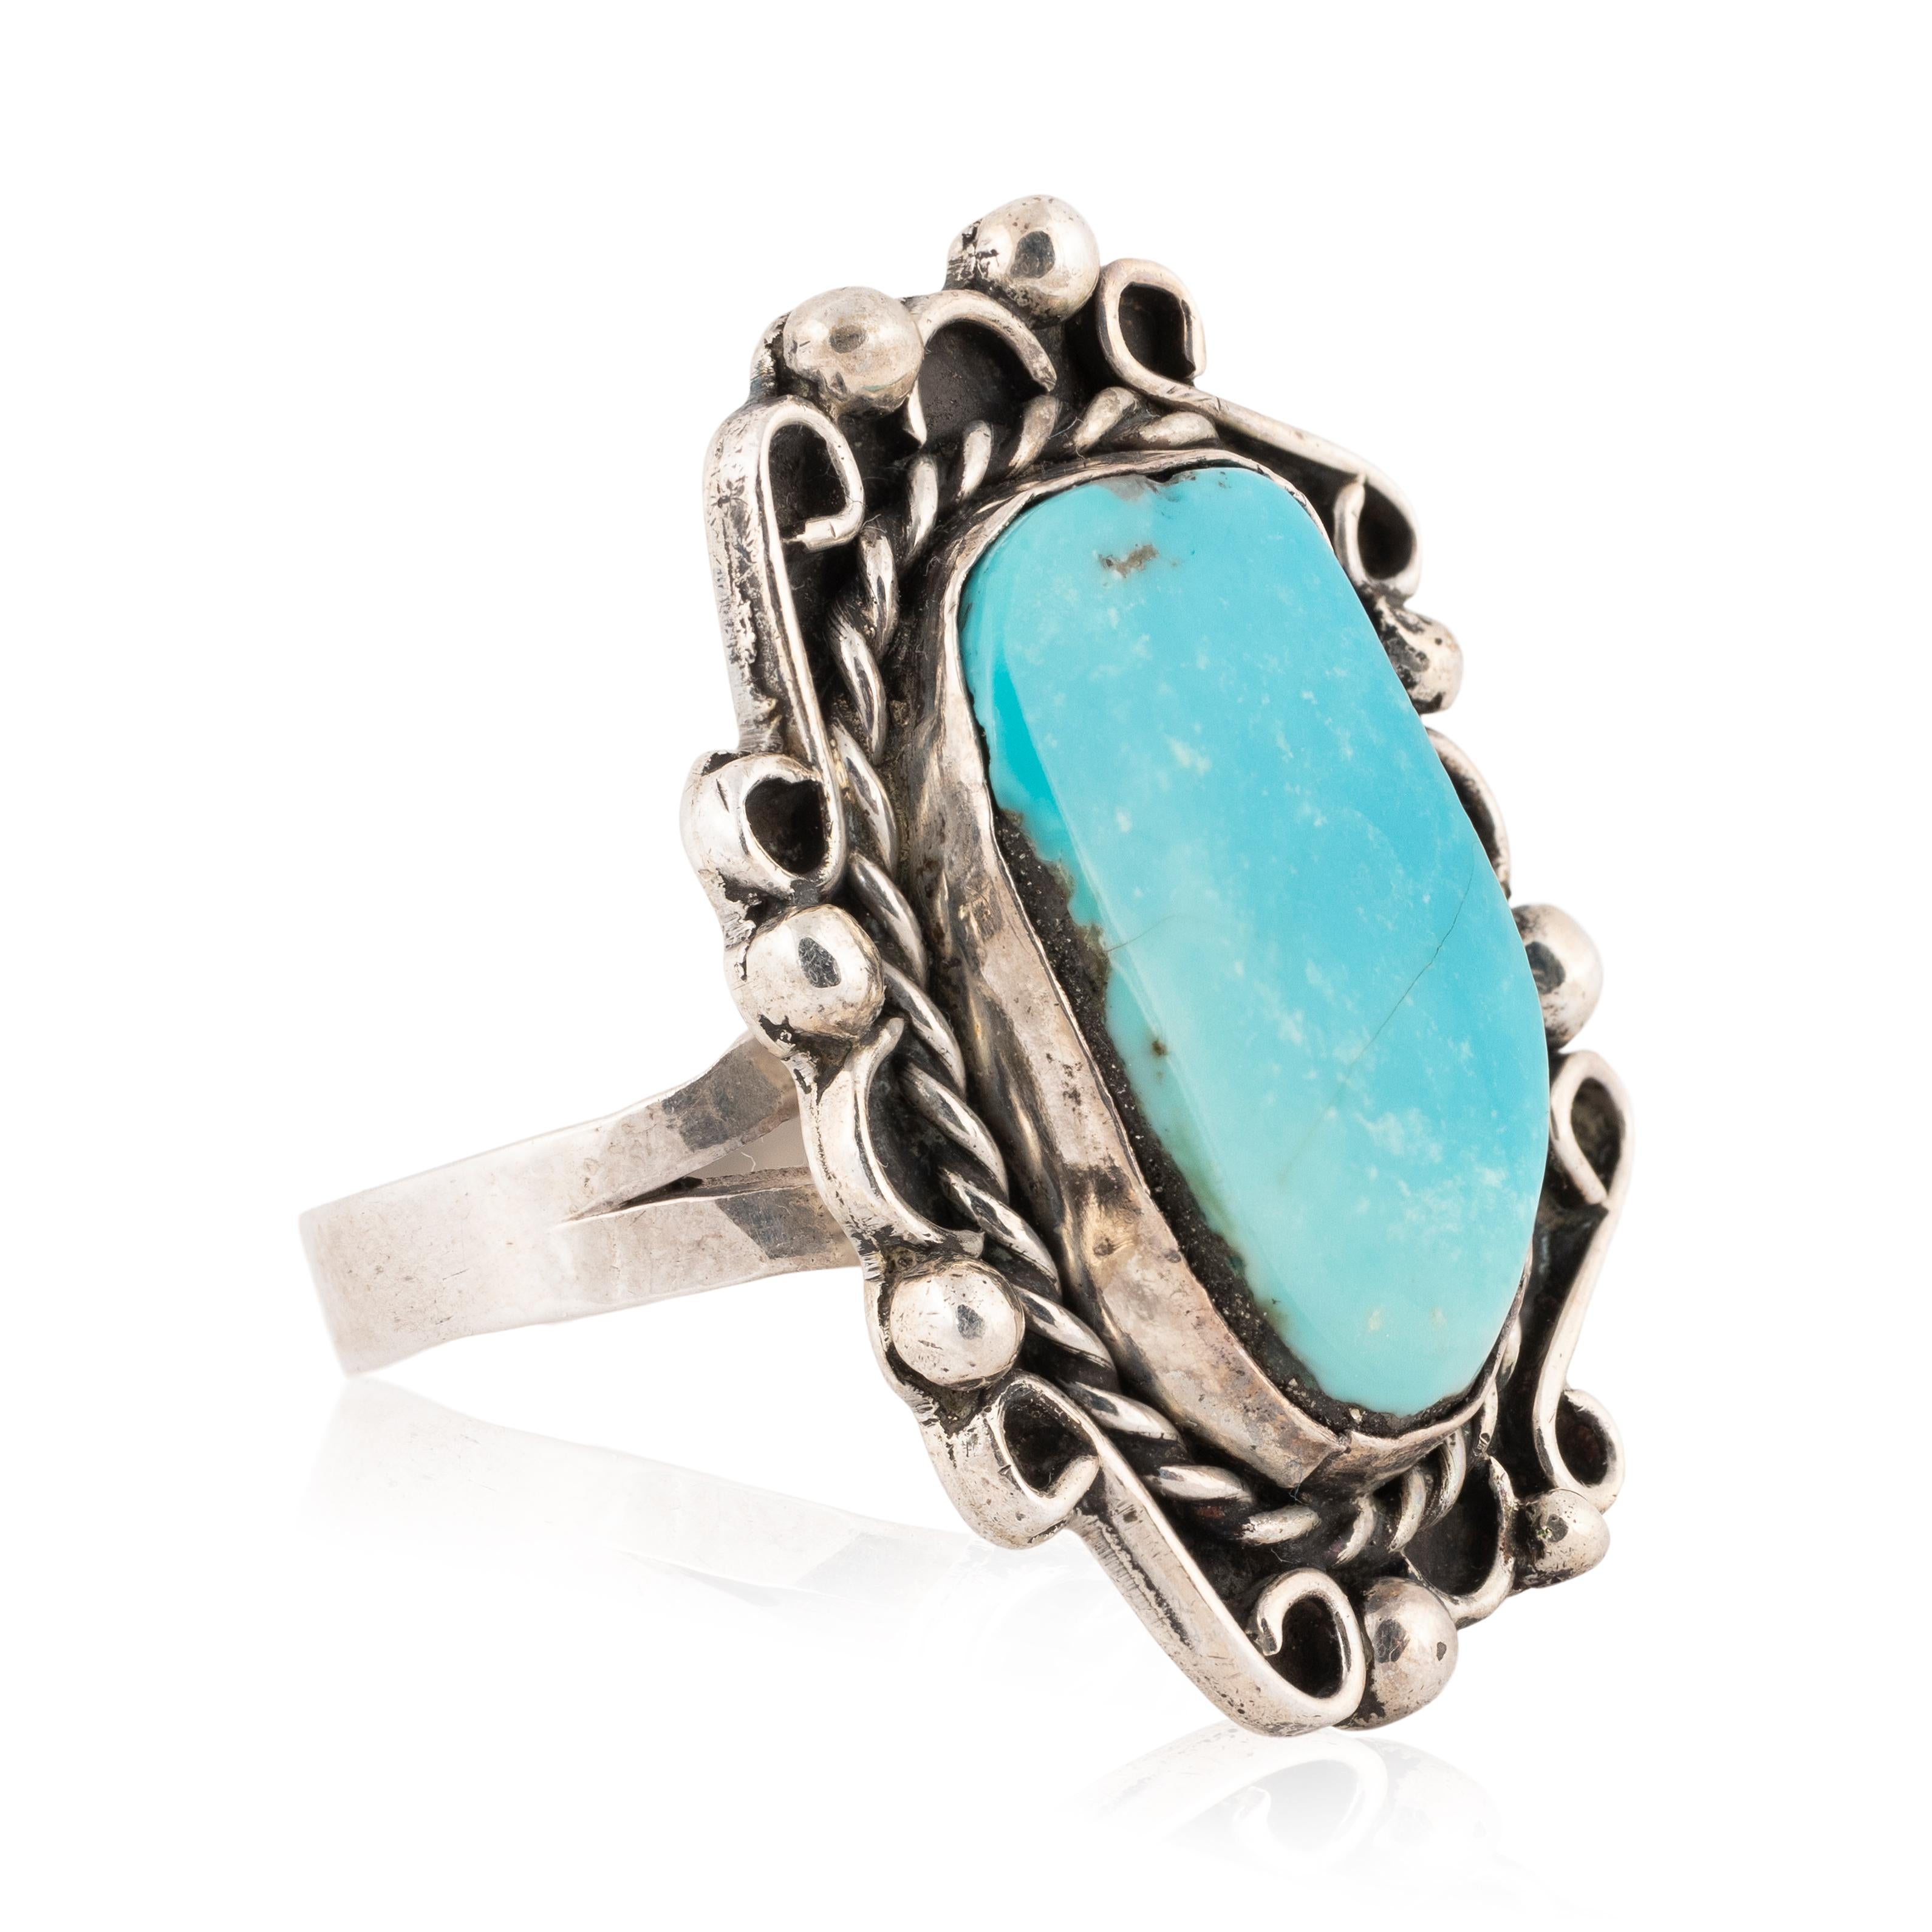 
Navajo Morenci mine turquoise and sterling ring. Center stone set in shadow box design with twisted rope and bead border. Nice patina and shows age. 

PERIOD: After 1950

ORIGIN: Navajo, Southwest

SIZE: Size 8.7; 1.25